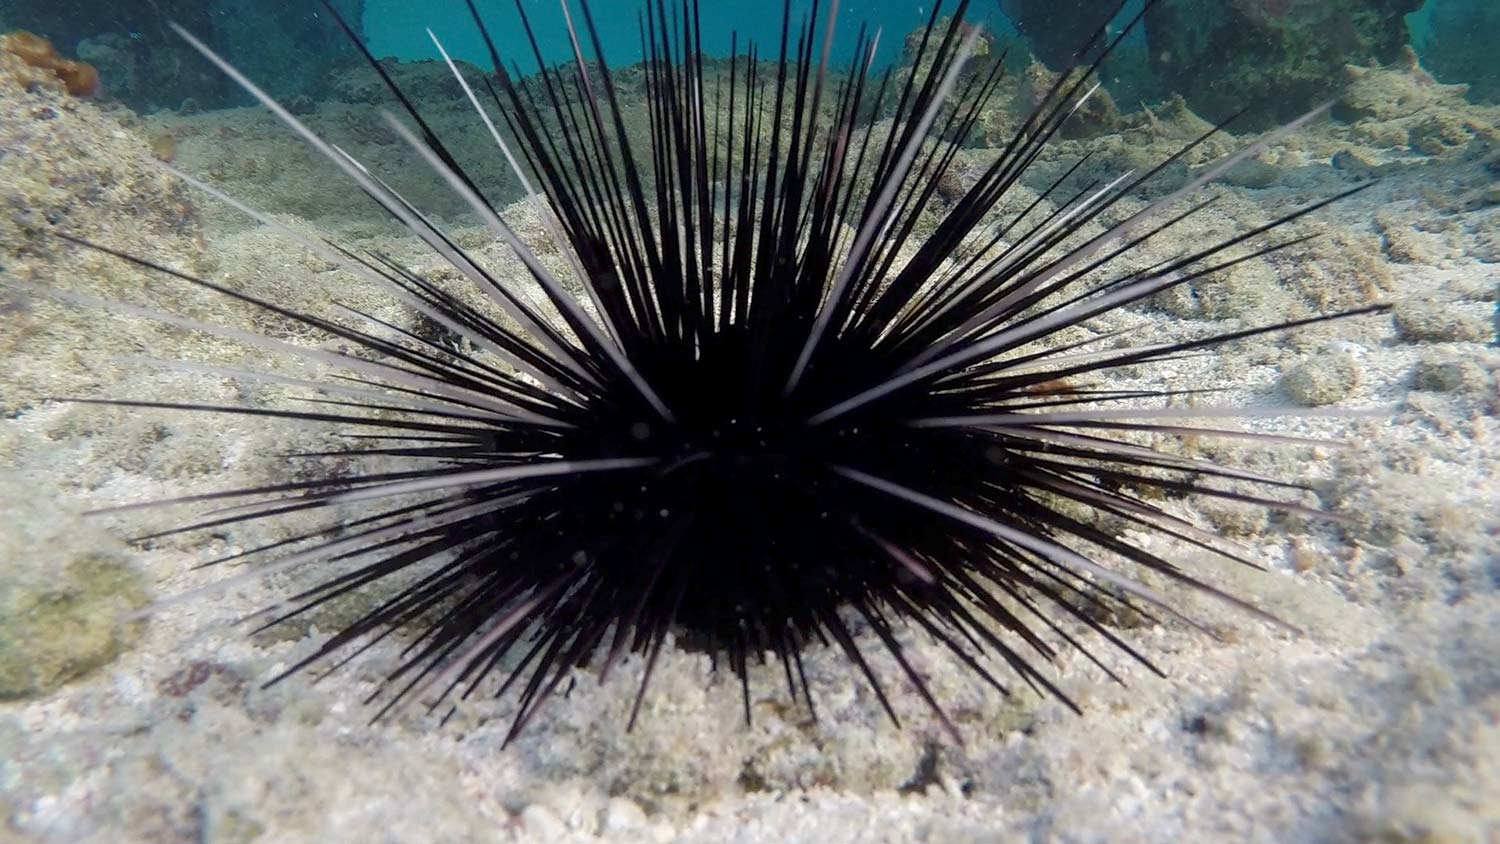 Long-spined reef urchin